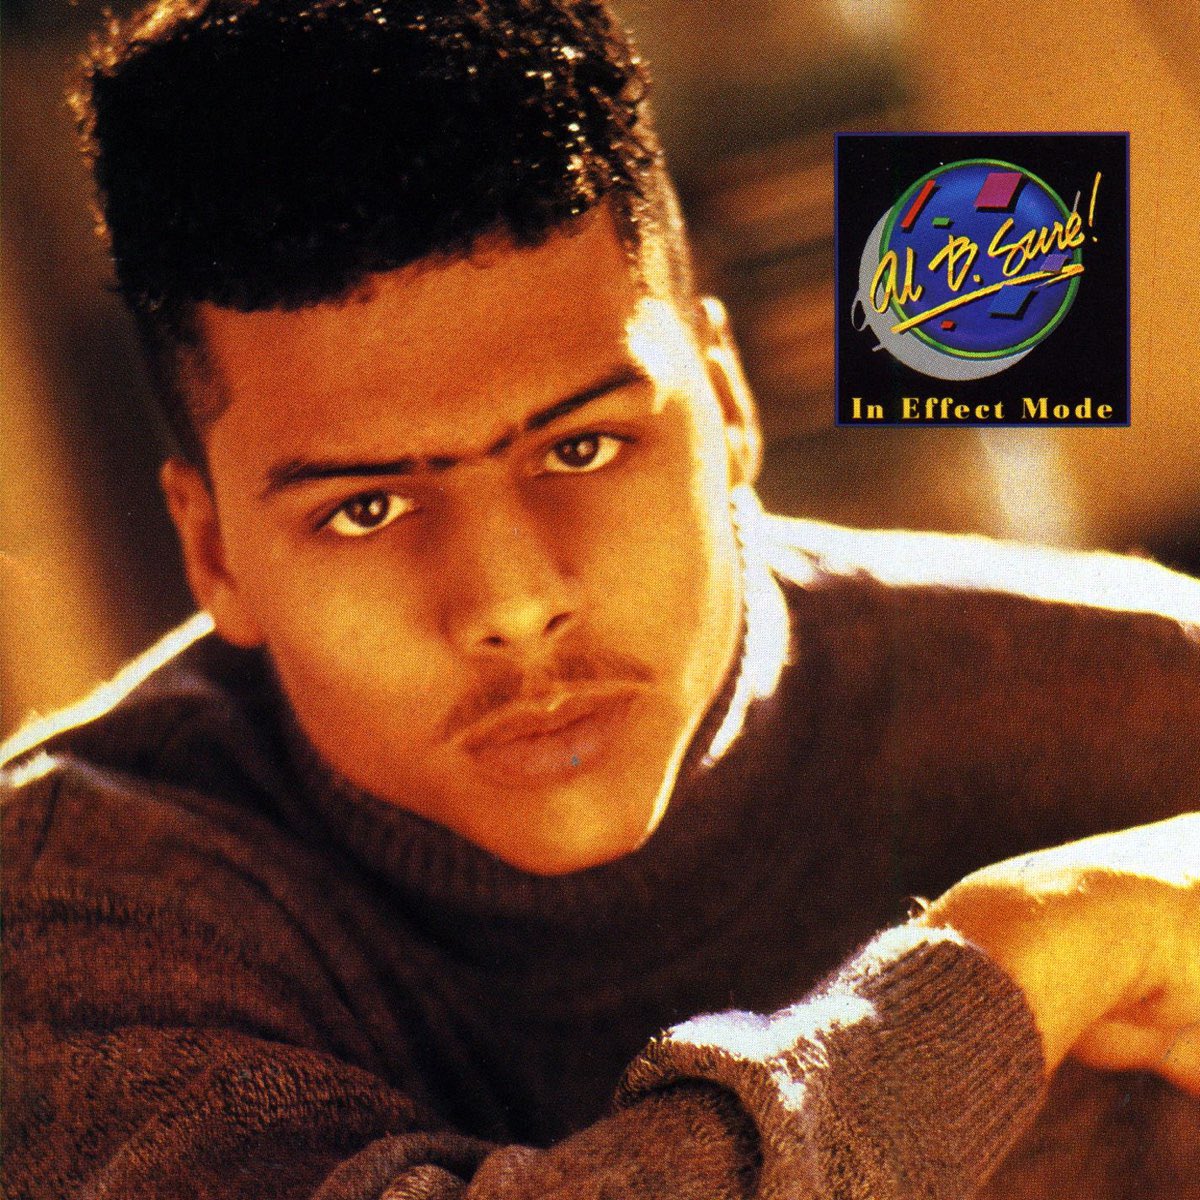 Happy 36th birthday to Al B. Sure!’s debut album “In Effect Mode,” released on May 3, 1988!

What songs on this album went platinum on your Walkman?

#AlBSure #InEffectMode #InEffectMode36 #SoulBounce